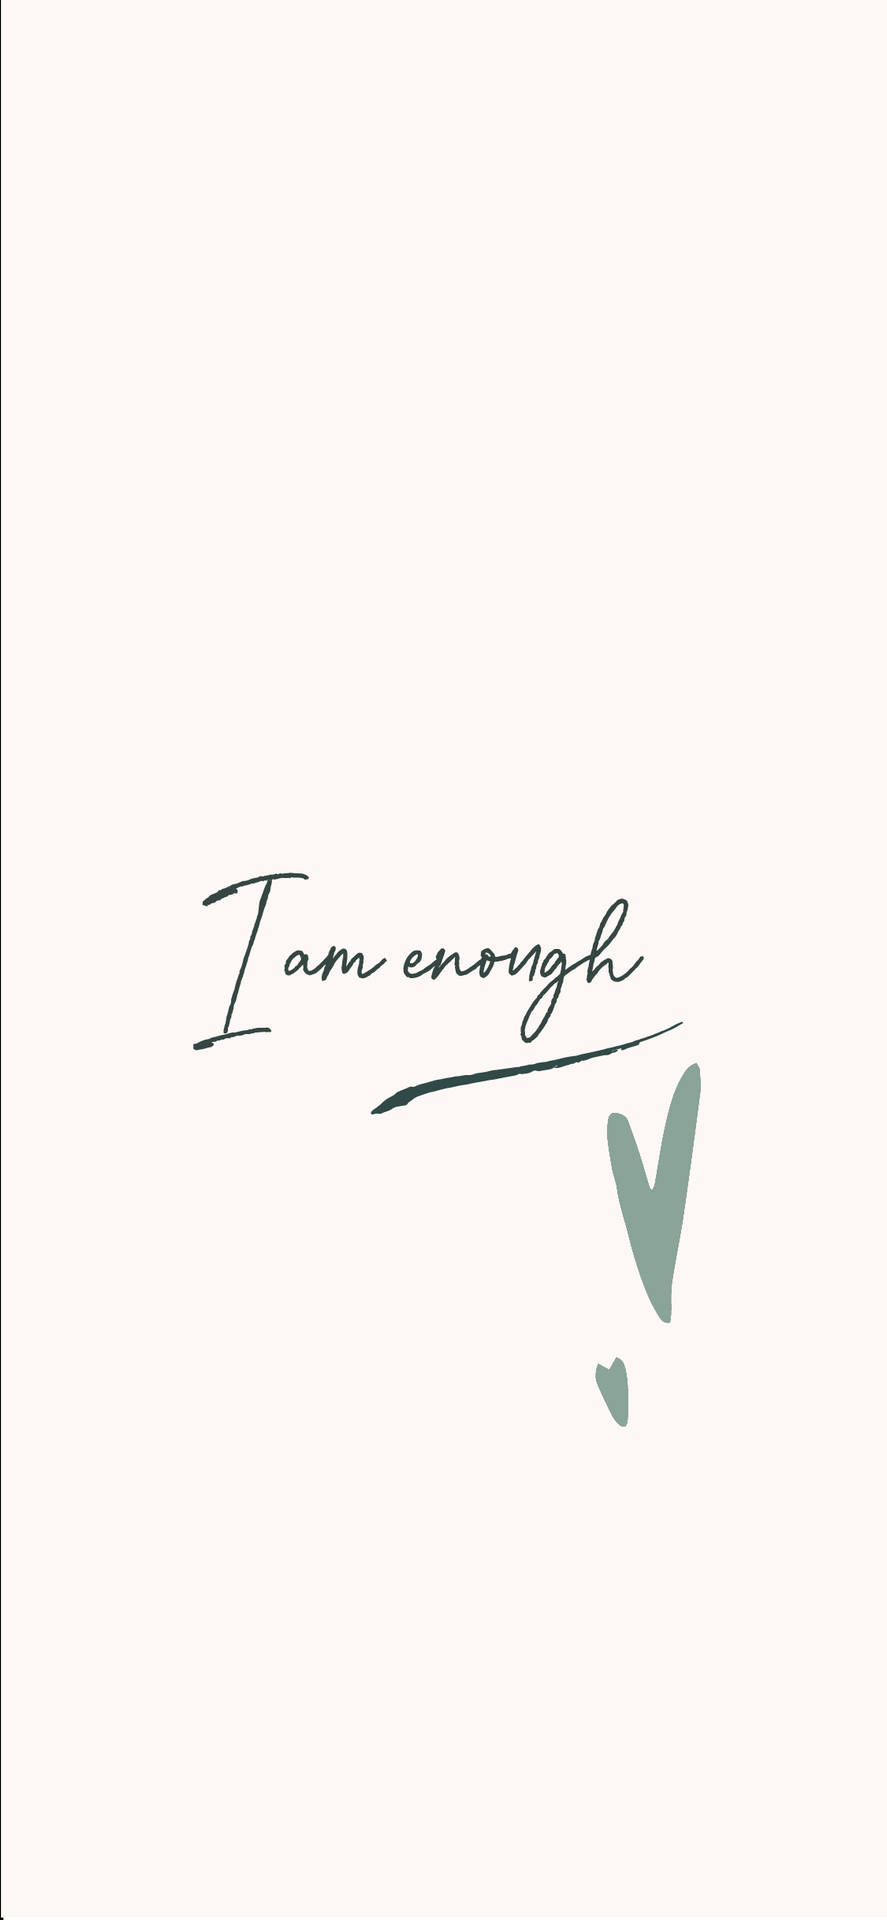 Free I Am Enough Wallpaper Downloads, [100+] I Am Enough Wallpapers for  FREE 